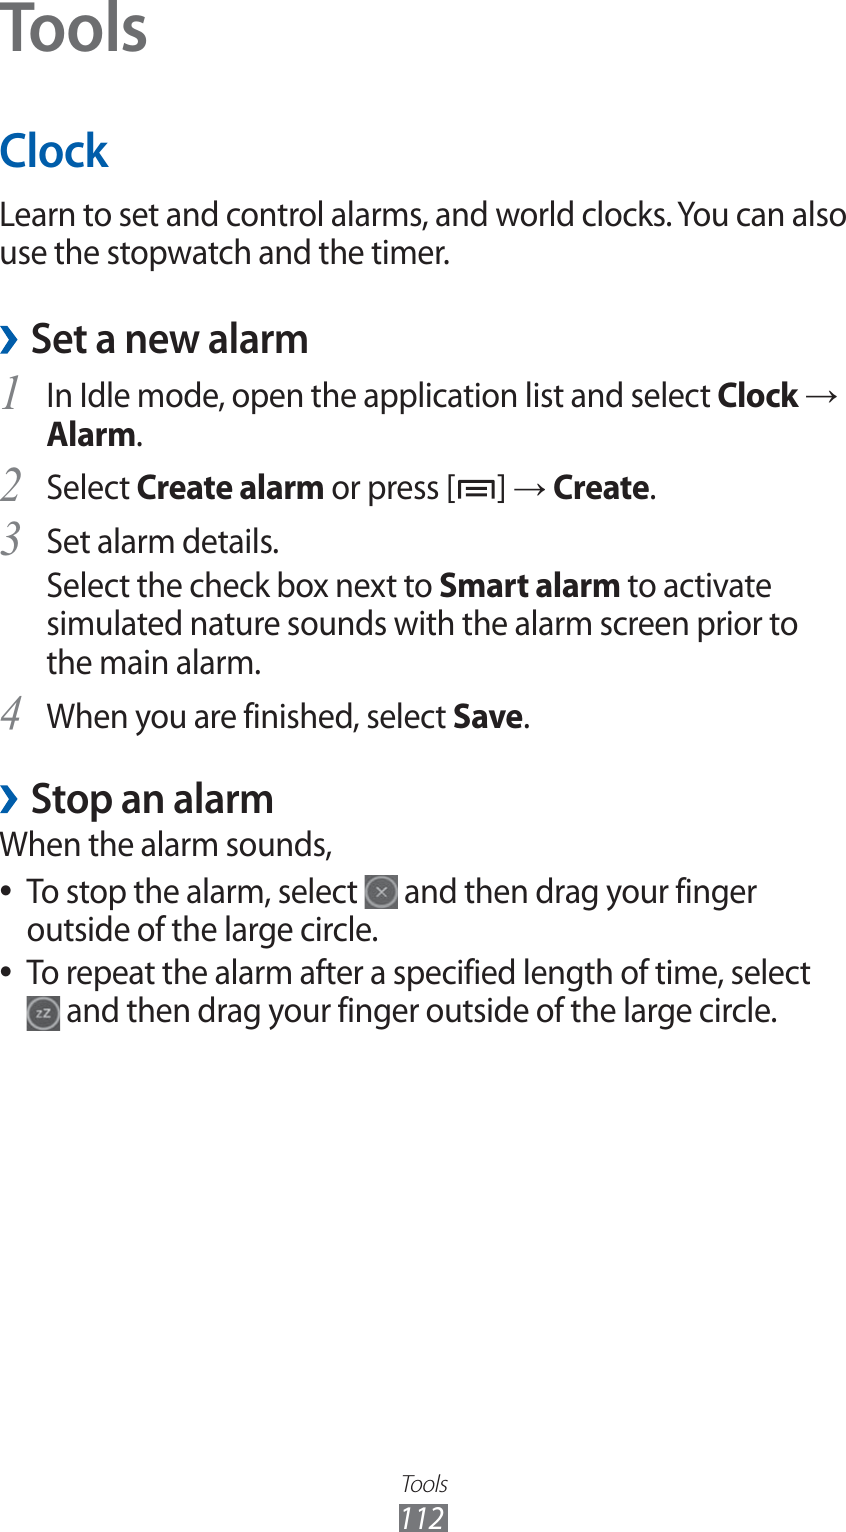 Tools112ToolsClockLearn to set and control alarms, and world clocks. You can also use the stopwatch and the timer.Set a new alarm ›In Idle mode, open the application list and select 1 Clock → Alarm.Select 2 Create alarm or press [ ] → Create.Set alarm details.3 Select the check box next to Smart alarm to activate simulated nature sounds with the alarm screen prior to the main alarm.When you are finished, select 4 Save.Stop an alarm ›When the alarm sounds,To stop the alarm, select  ● and then drag your finger outside of the large circle.To repeat the alarm after a specified length of time, select  ● and then drag your finger outside of the large circle.